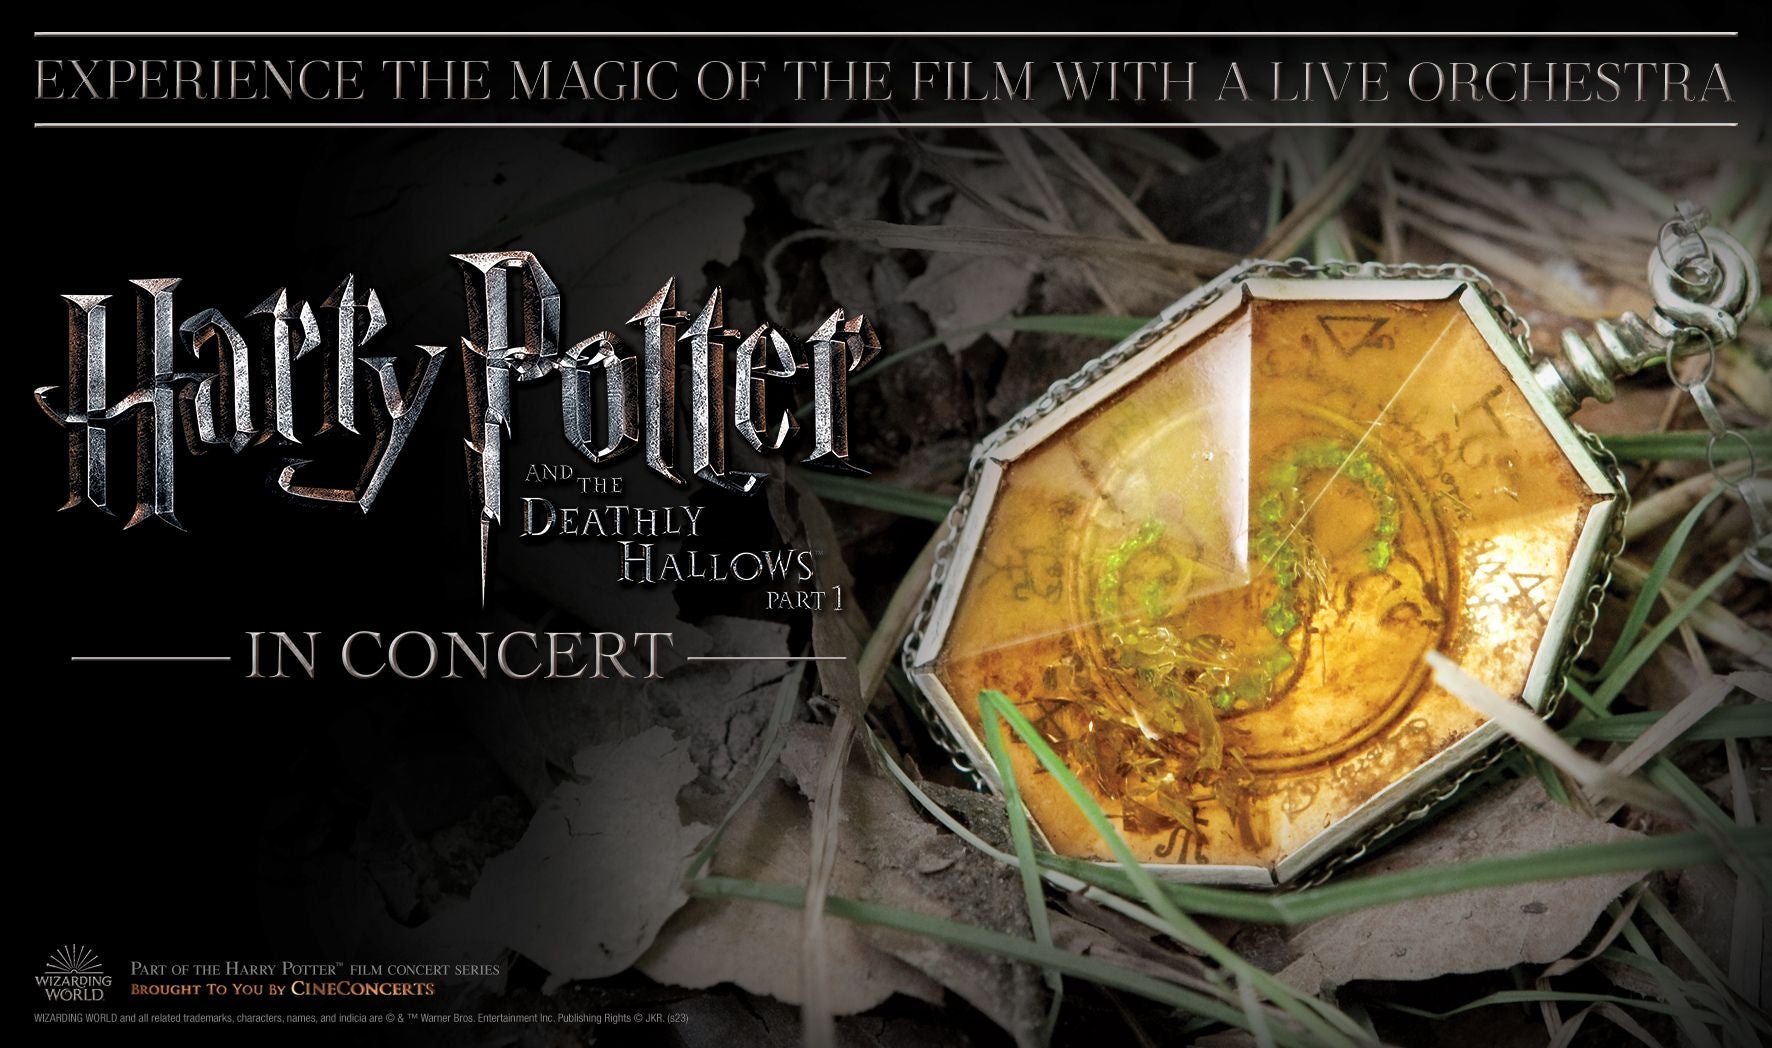 More Info for Harry Potter and the Deathly Hallows™ Part 1 in Concert